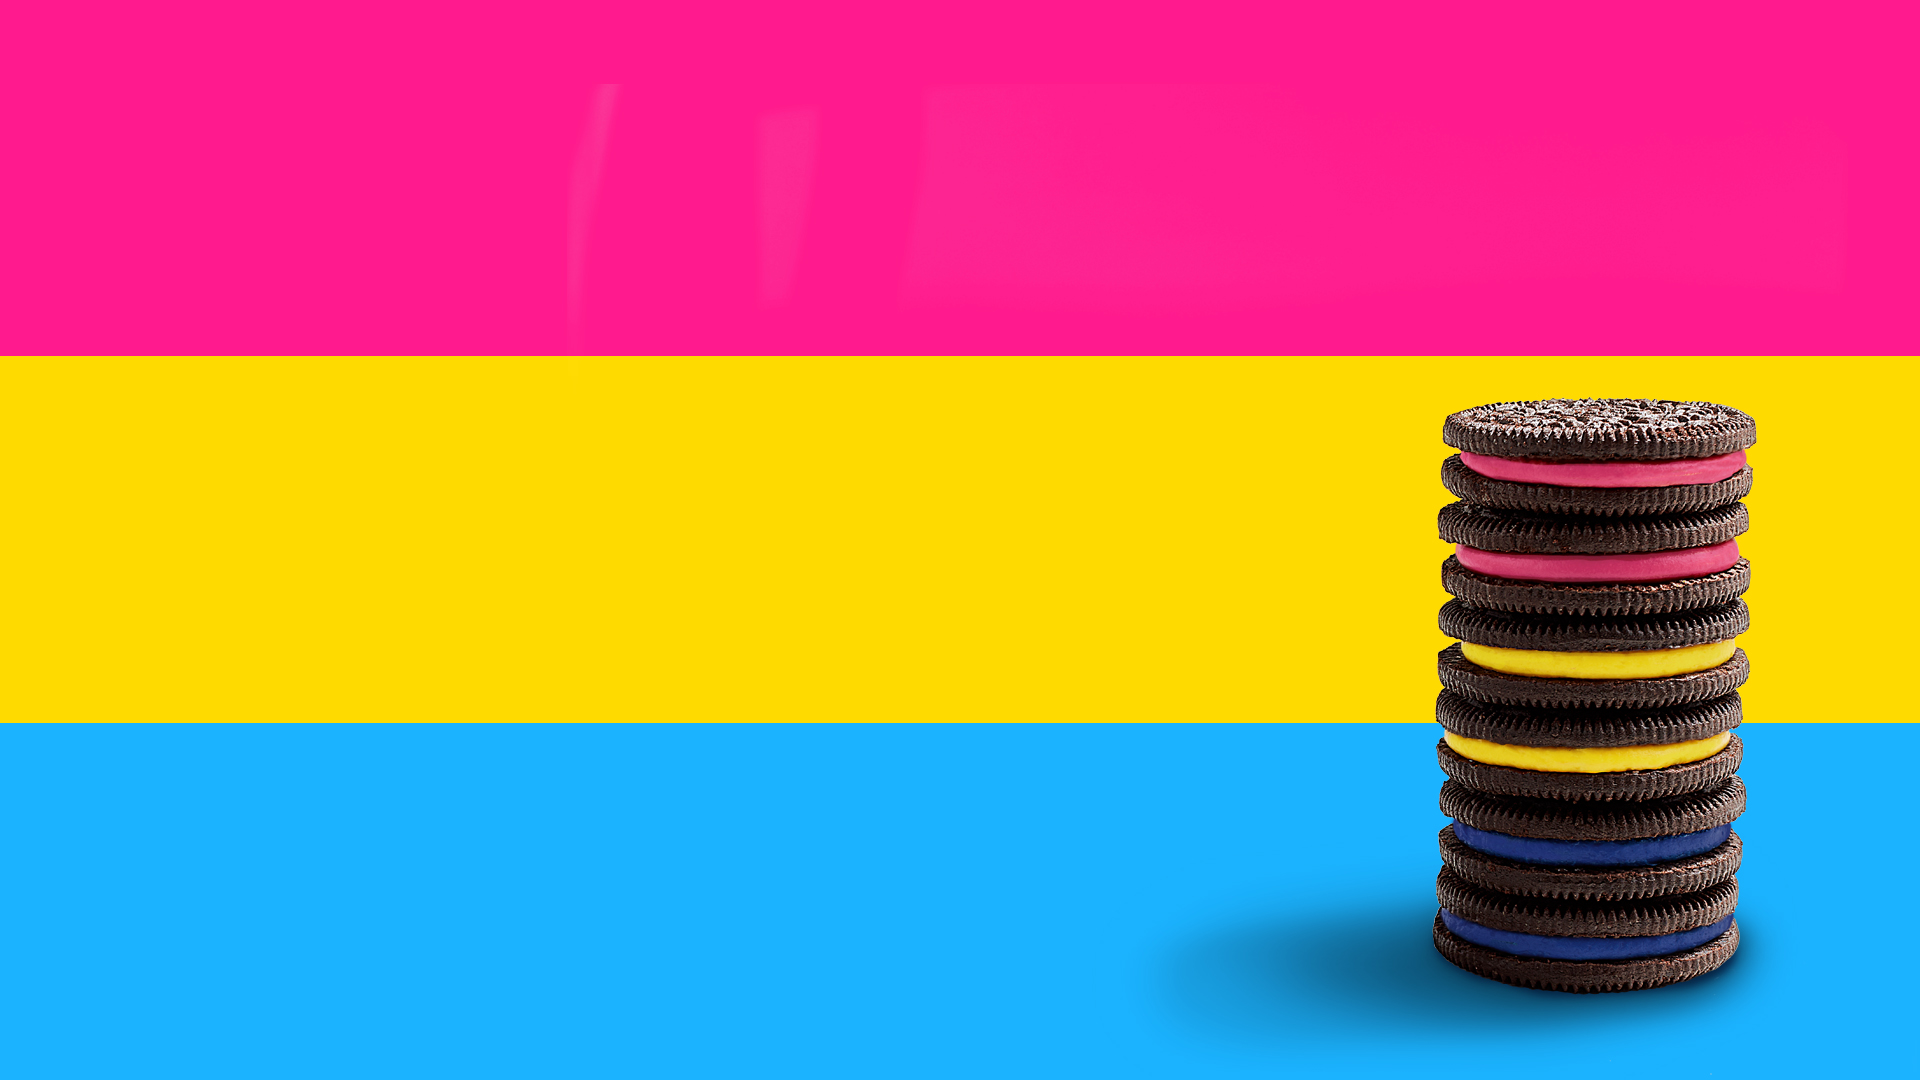 Oreo Cookie The Pansexual Pride Flag Consists Of Three Horizontal Stripes One Pink One Yellow And One Light Blue